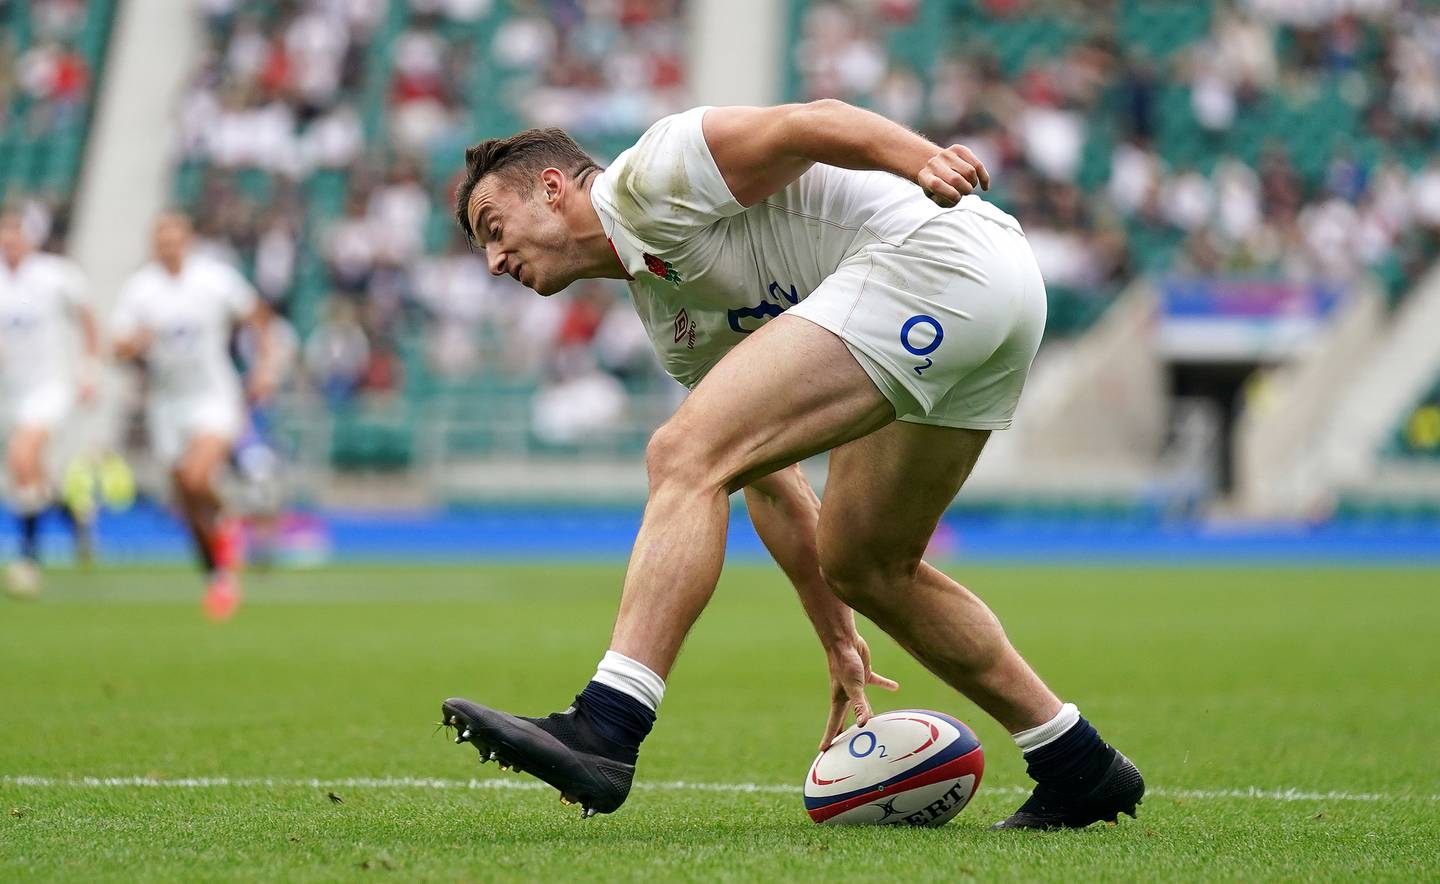 England's Adam Radwan scores a try during the Summer Series match at Twickenham against Canada. PA